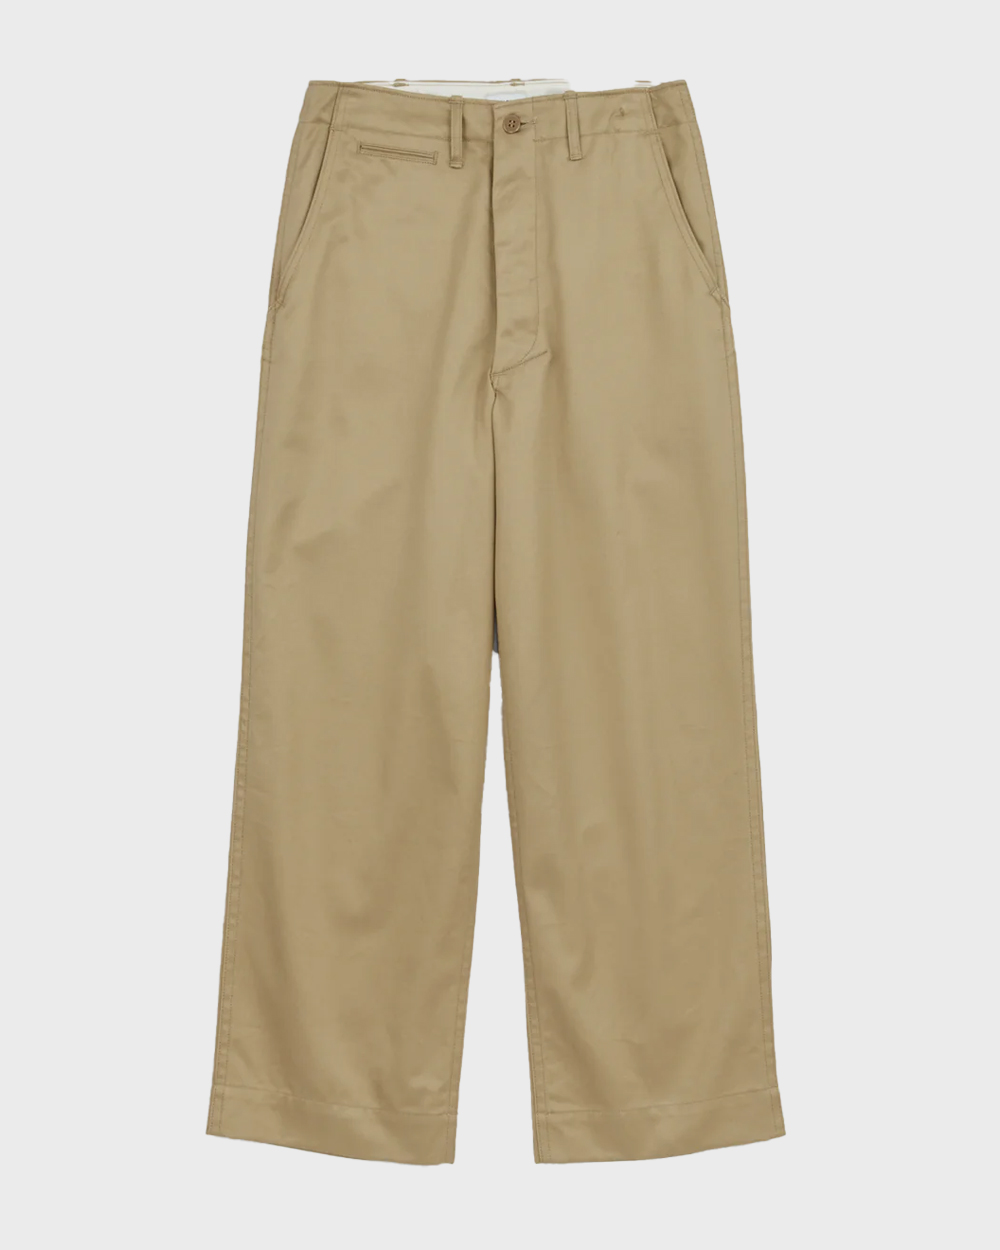 Weapon Chino Cloth Pants (Beige)